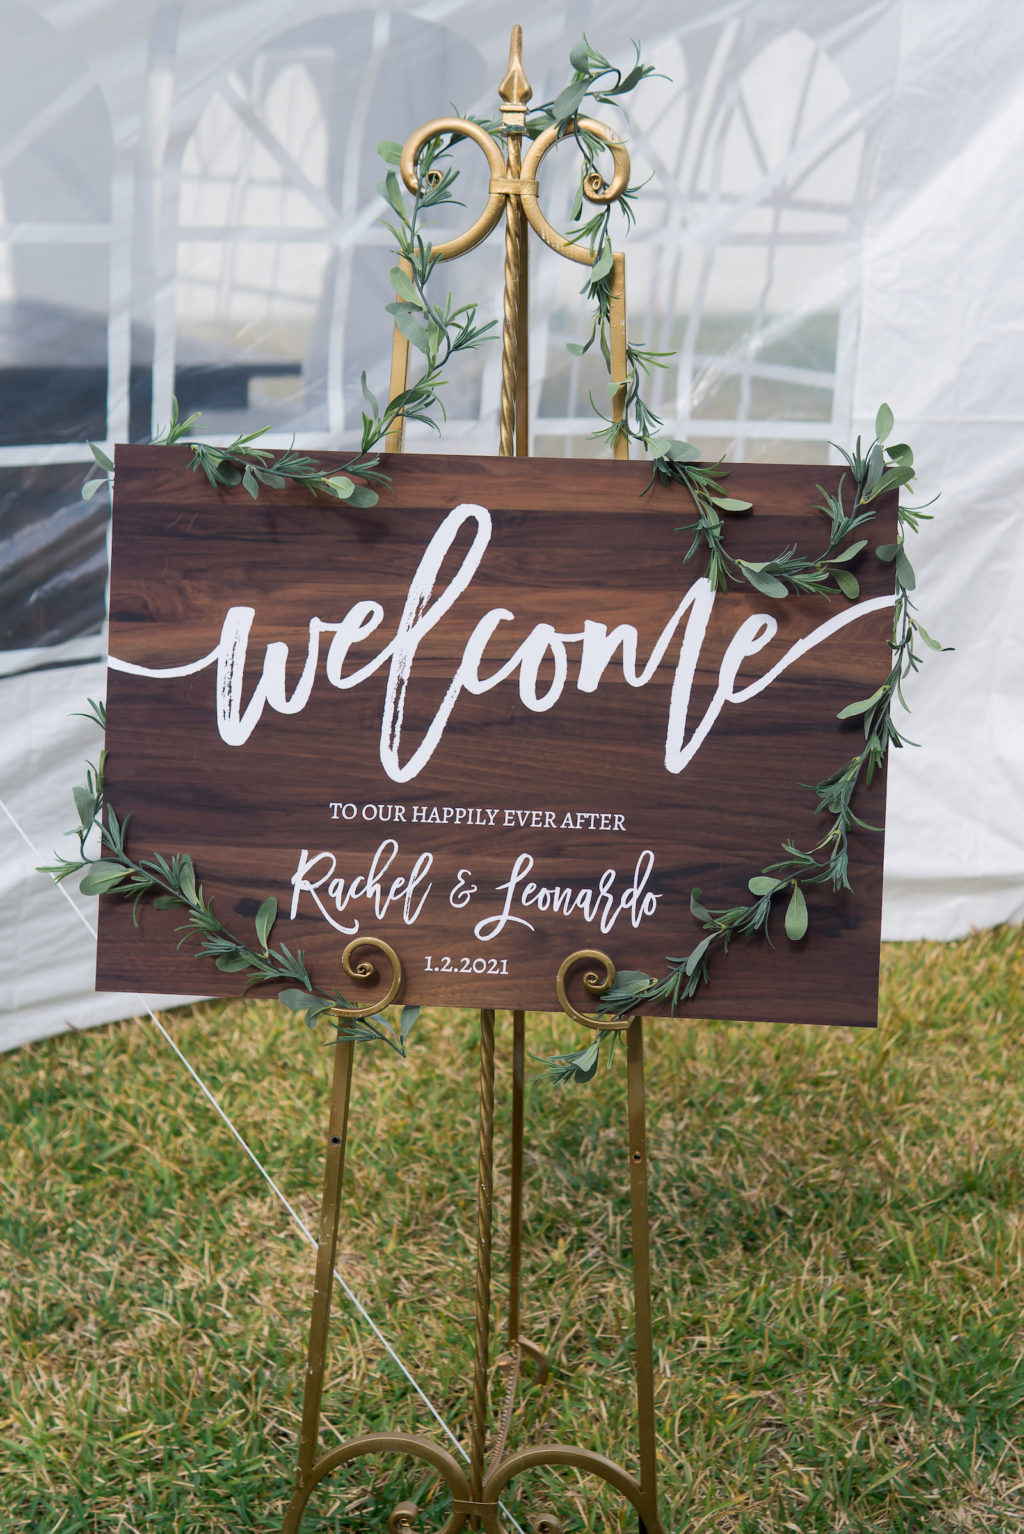 Rustic Wedding Ceremony Decor, Wooden Welcome Sign with Greenery Garland | Tampa Bay Wedding Planner Eventfull Weddings